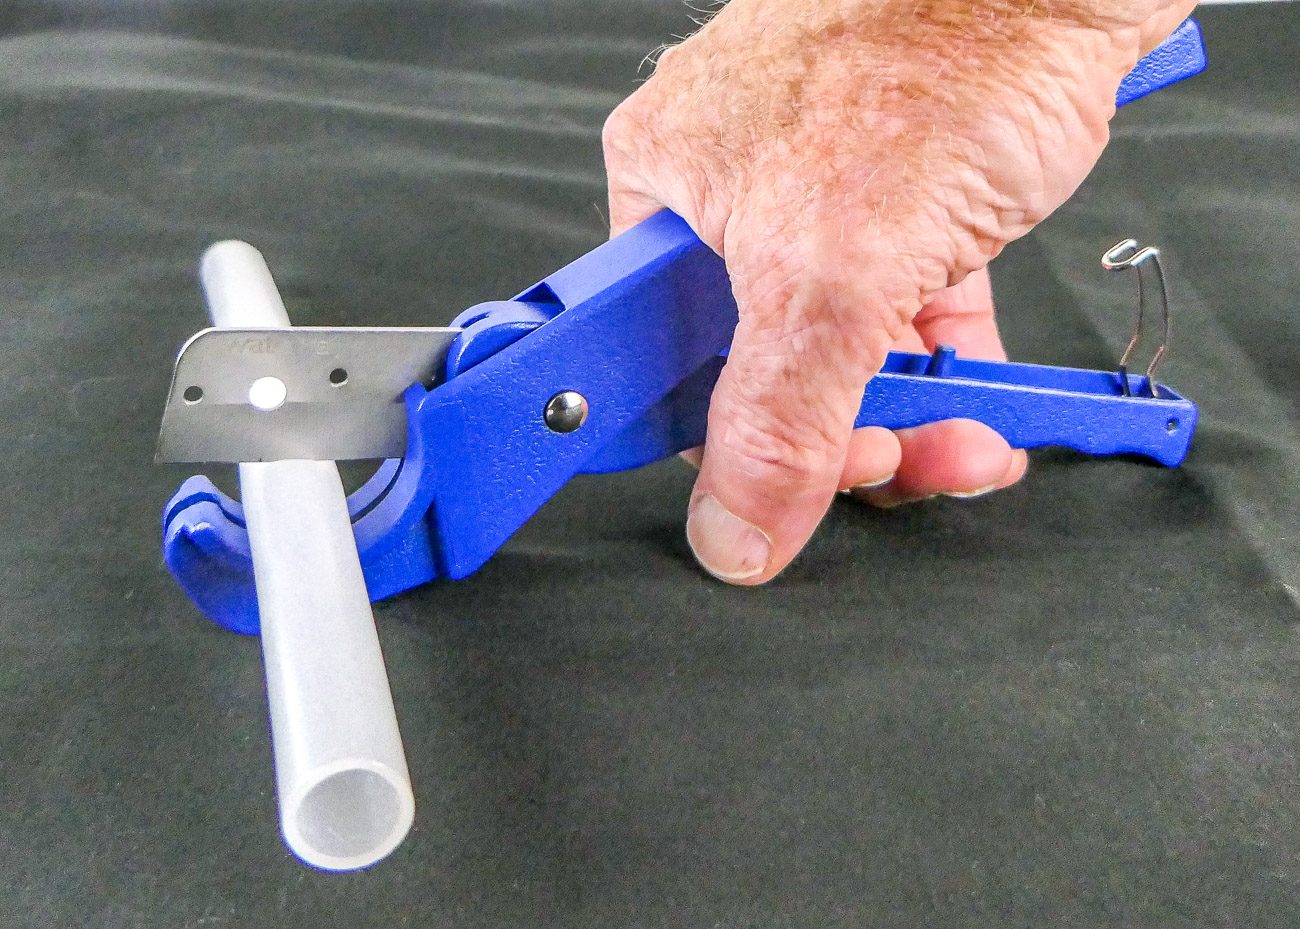 Waterra Tubing Cutter for Groundwater Tubing